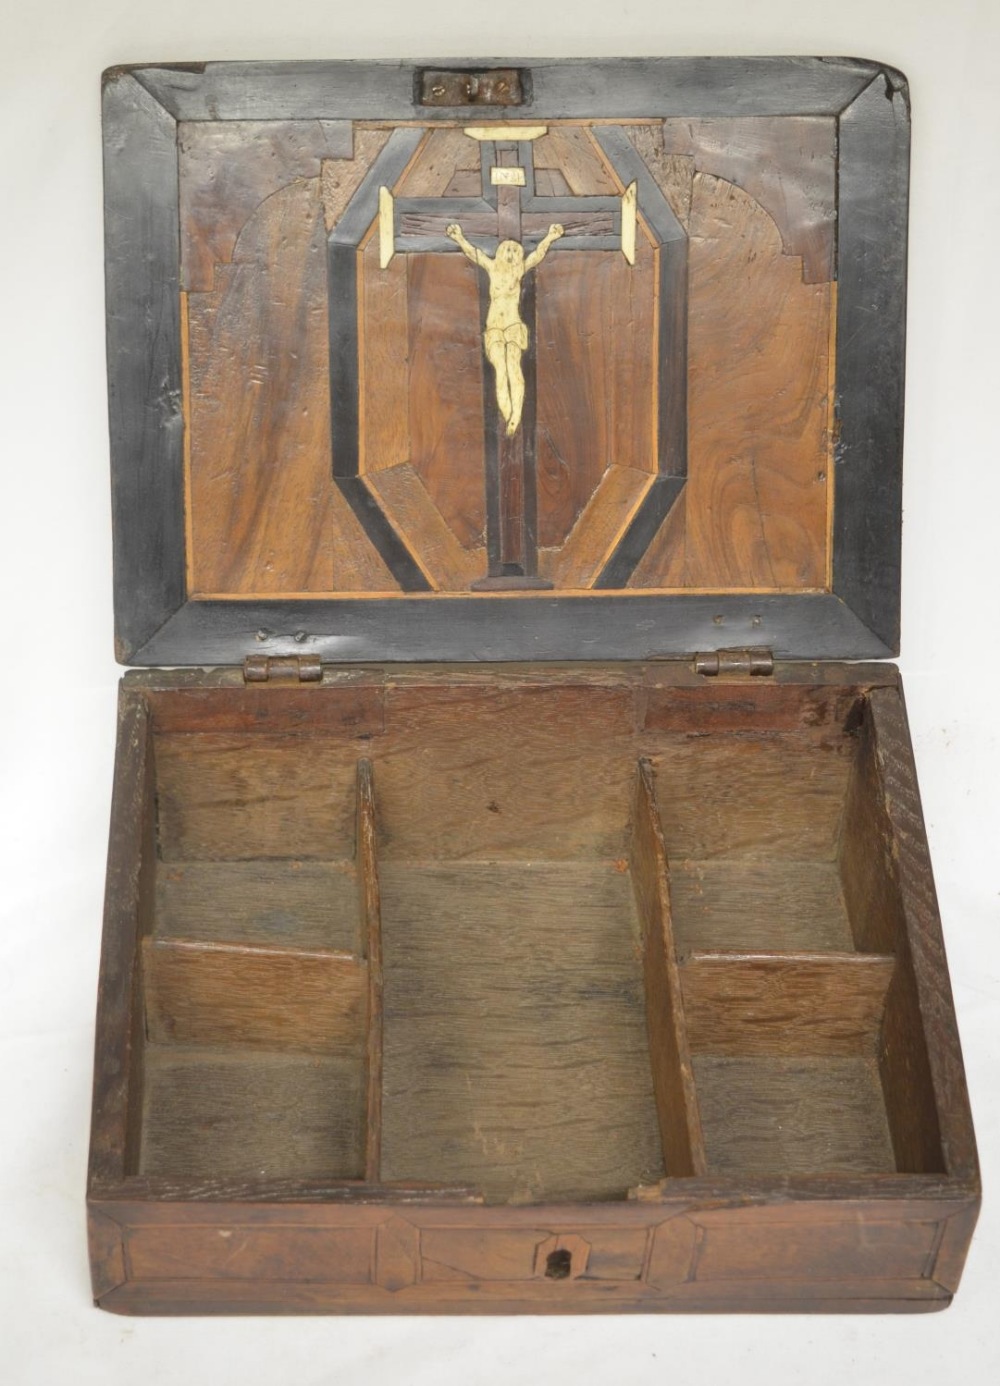 Circa 17th century oak sacrament box with external panelling and ornate internal Christ on the cross - Image 2 of 4